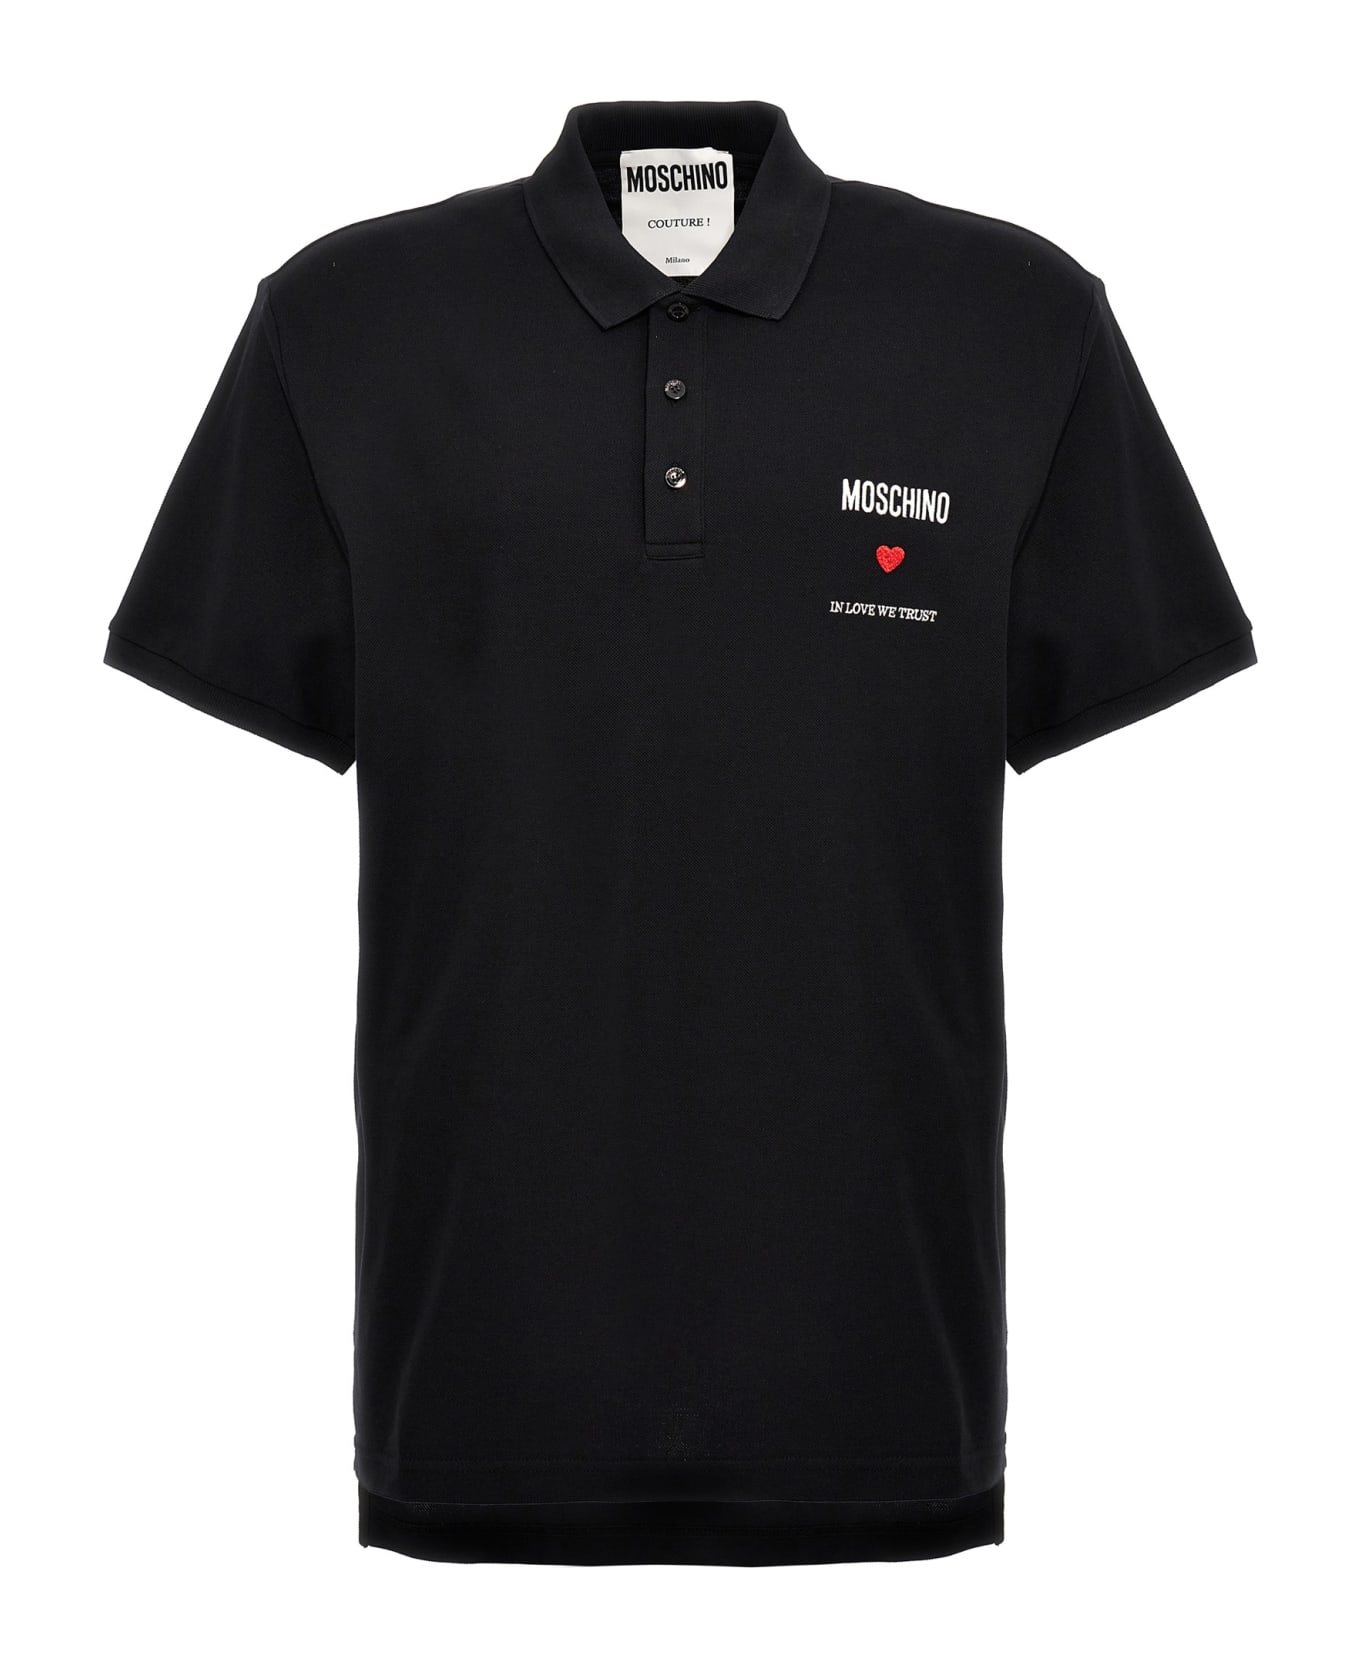 Moschino 'in Love We Trust' Polo Shirt - Black   ポロシャツ